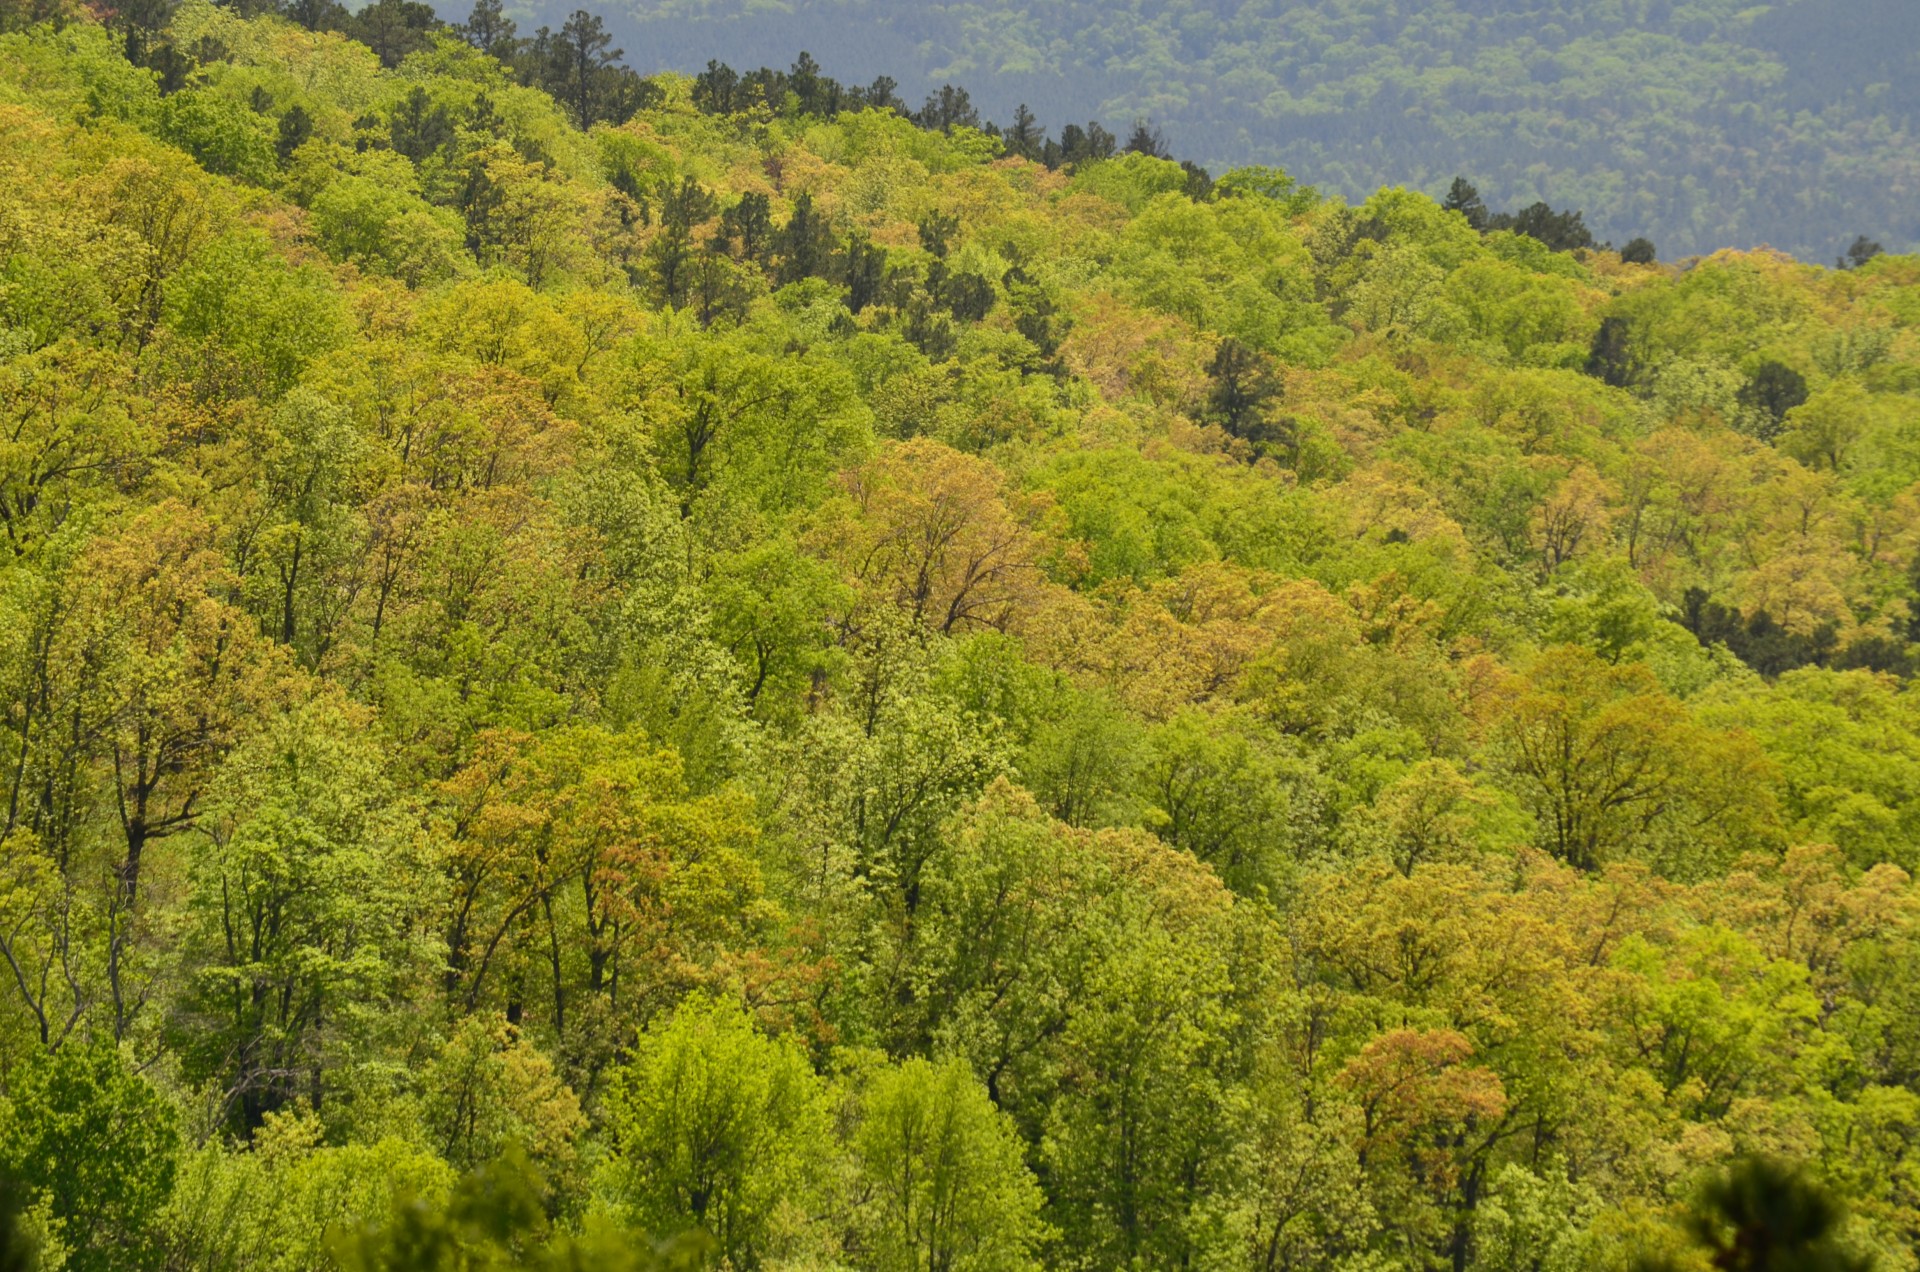 Forests in Arkansas' Ozark mountains tend to be a mixture of deciduous and conifer trees. Species compositions could change in the future.